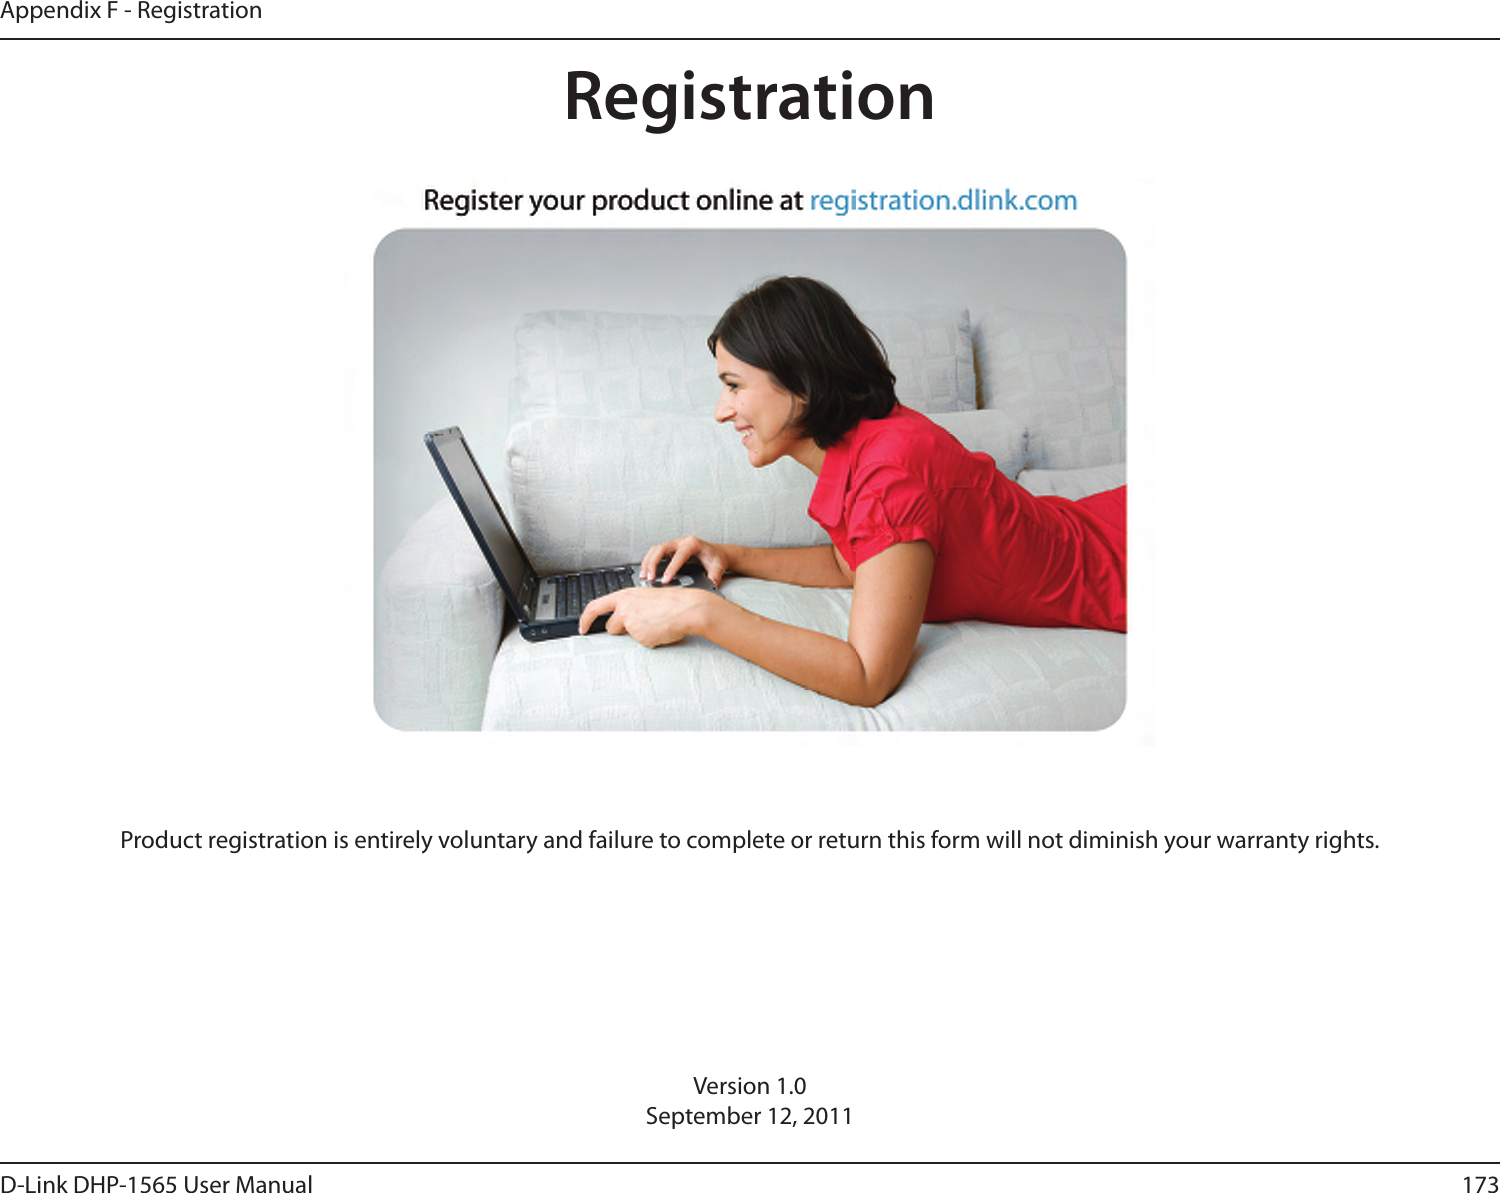 173D-Link DHP-1565 User ManualAppendix F - RegistrationVersion 1.0September 12, 2011Product registration is entirely voluntary and failure to complete or return this form will not diminish your warranty rights.Registration